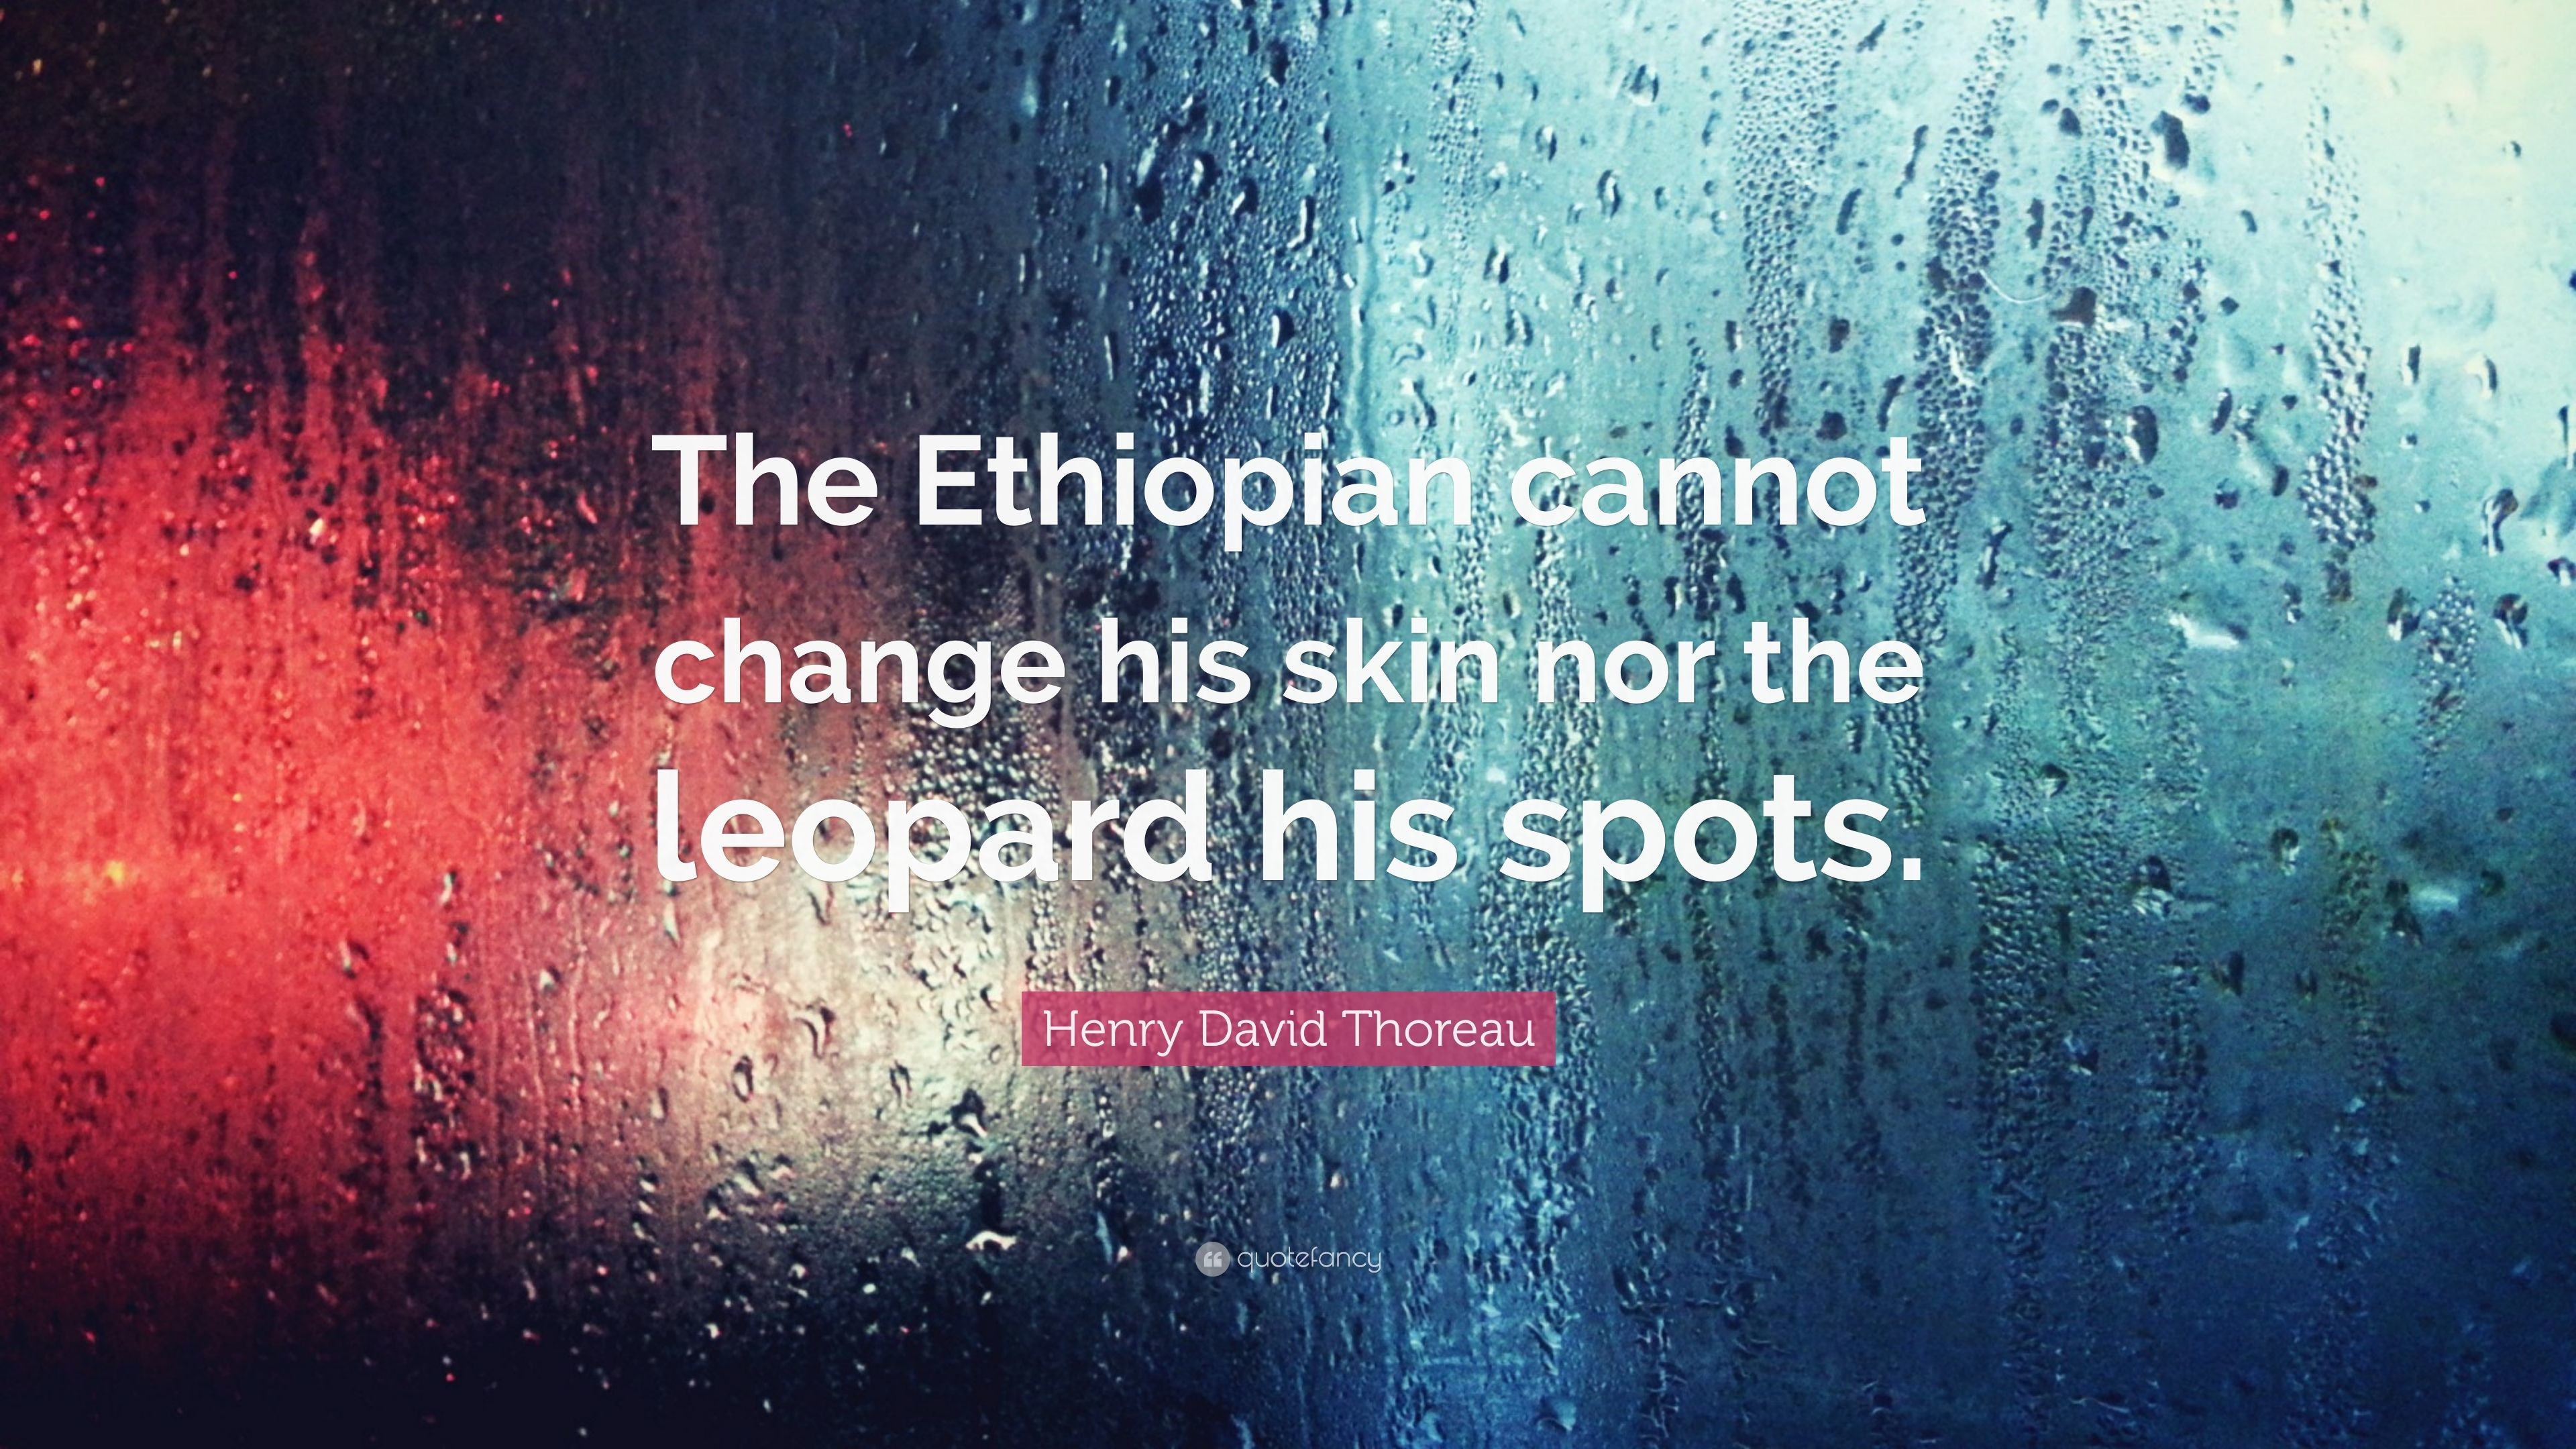 3840x2160 Henry David Thoreau Quote: “The Ethiopian cannot change his skin nor the  leopard his